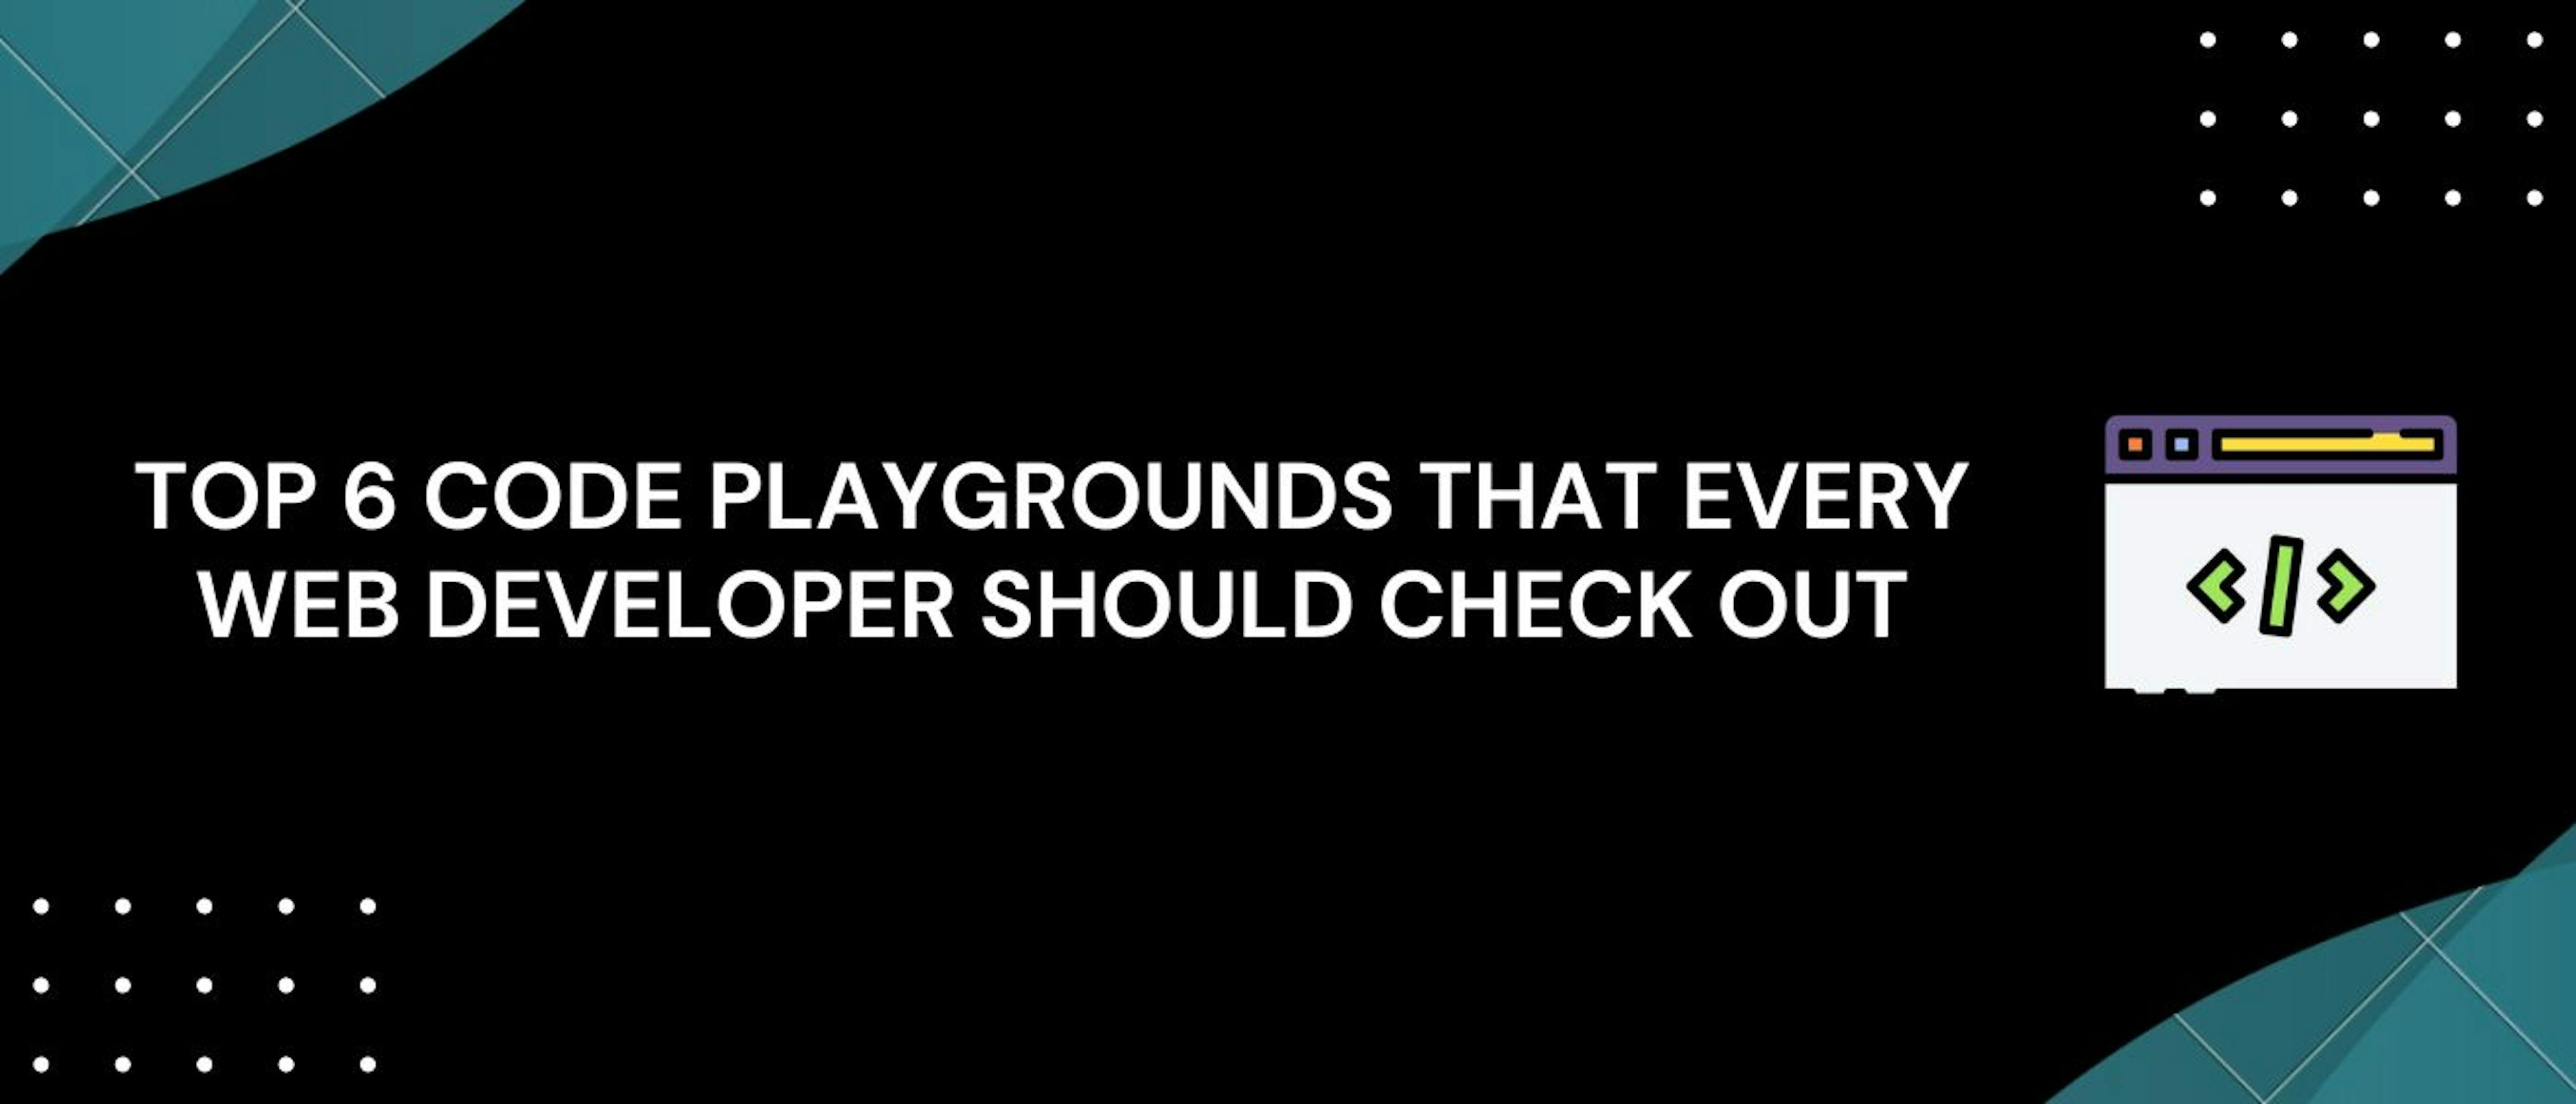 featured image - Top 6 Code Playgrounds That Every Web Developer Should Check Out